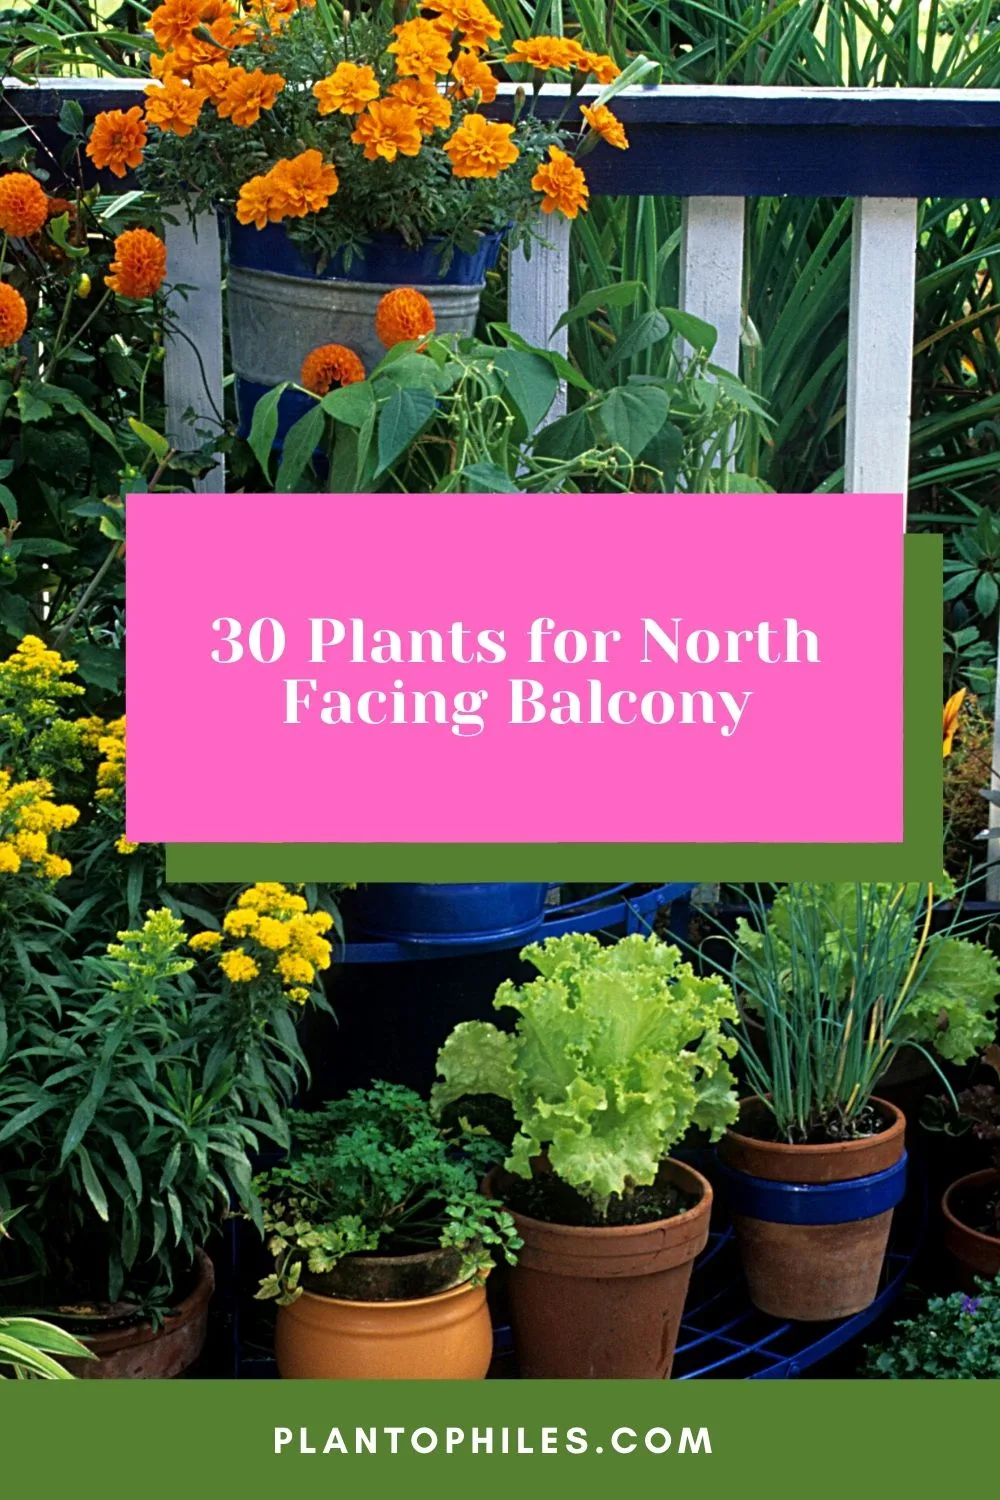 20 Plants for North Facing Balcony — Best Guide [20]